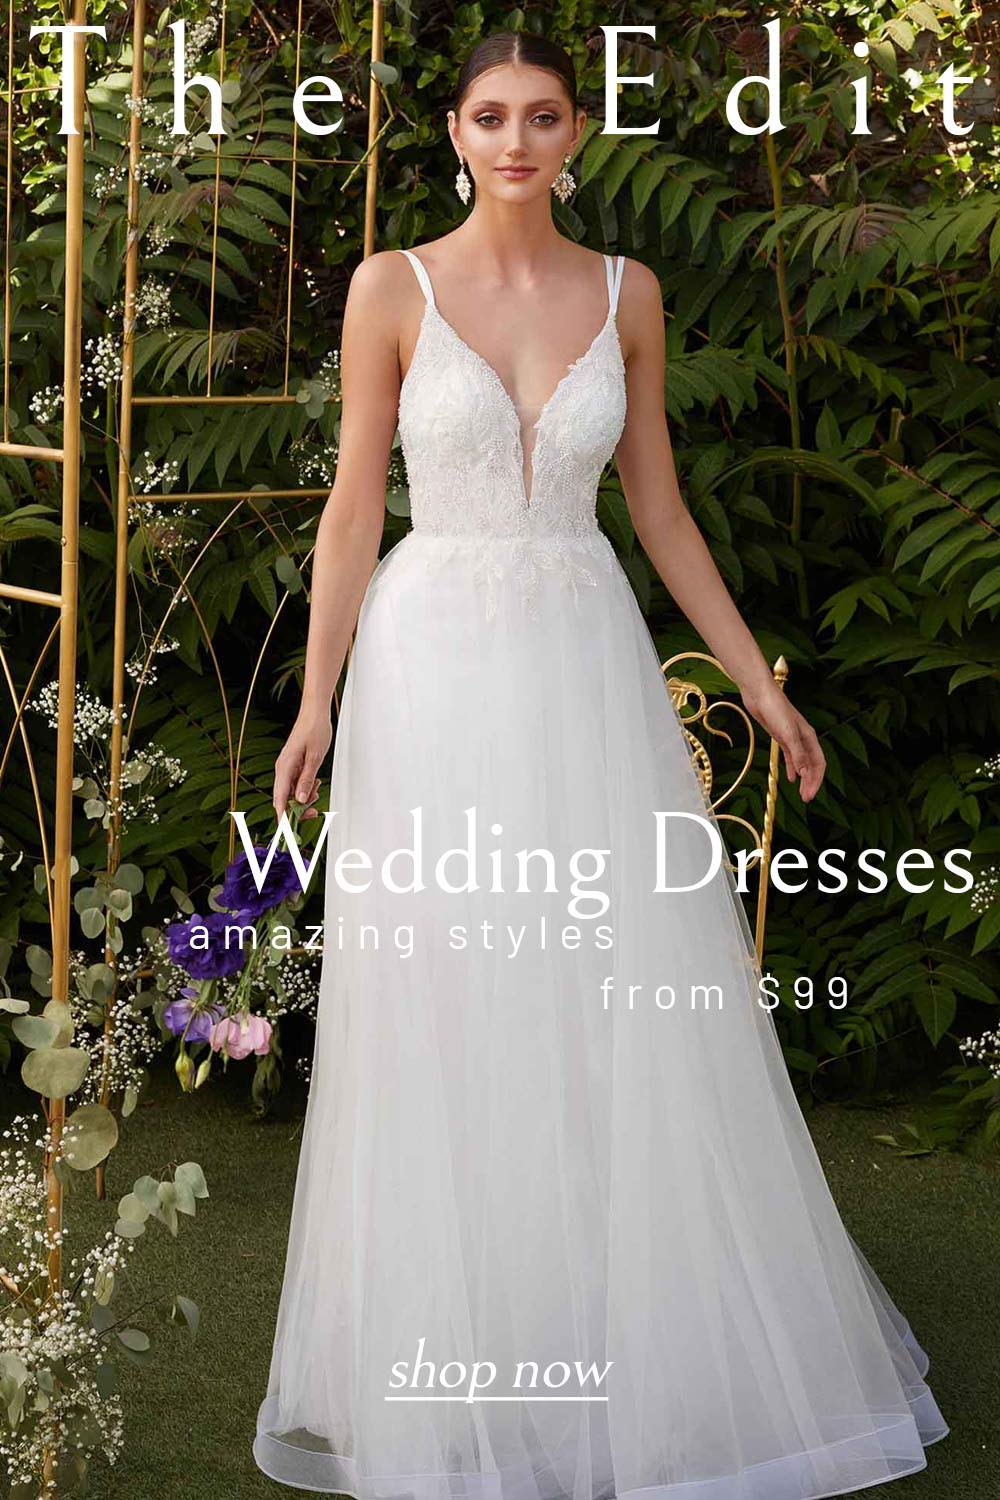 A woman in a white wedding dress with lace details stands in a garden. Text: The Edit: Wedding Dresses, Amazing Styles.